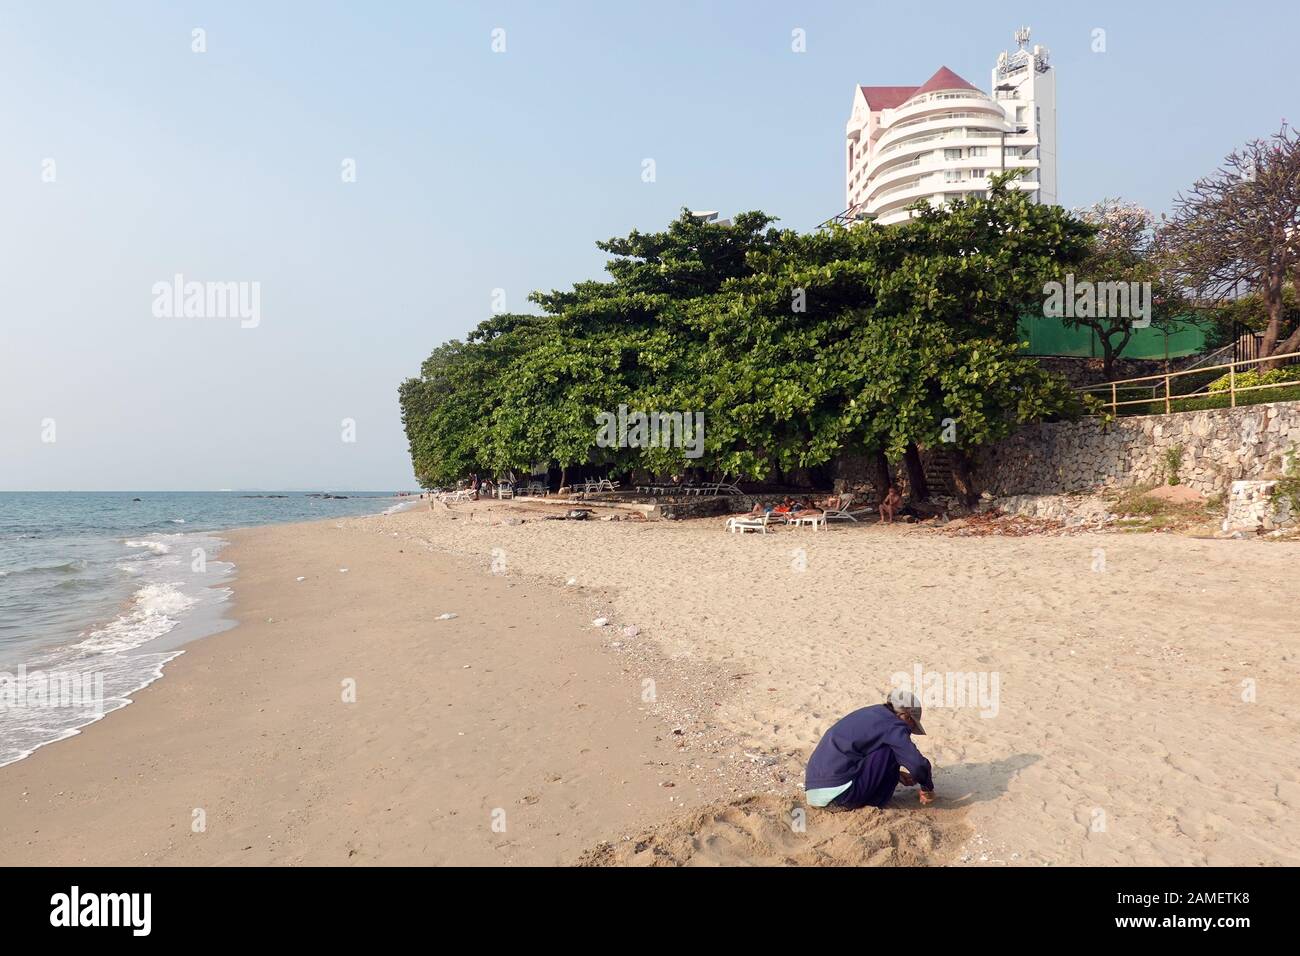 Pattaya, Thailand - December 23, 2019: Elder woman sitting on beach and trying to find clams. Foreigner tourists in sunbeds on background. Stock Photo